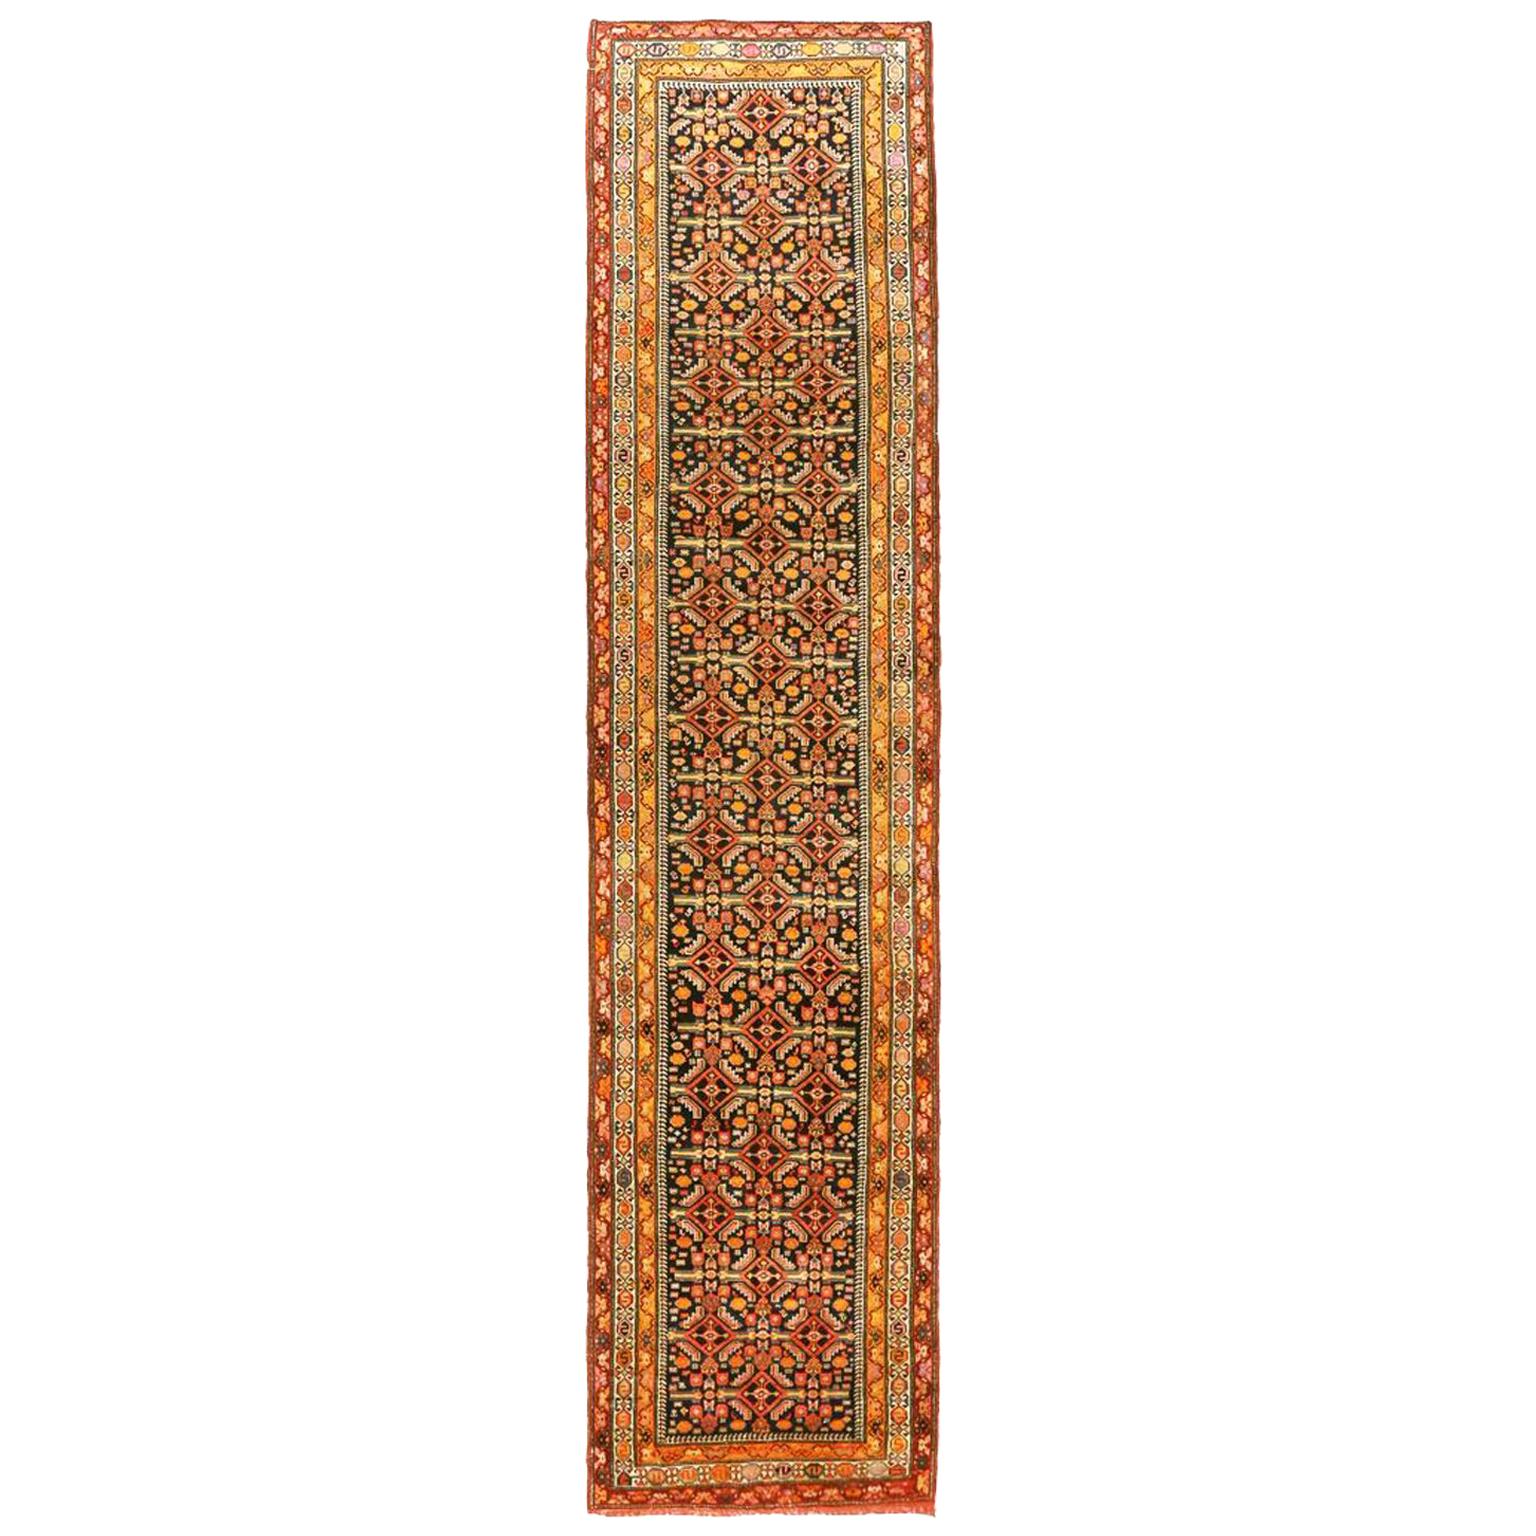 1910s Antique Persian Rug Azerbaijan Style with Fine Floral and Geometric Design For Sale